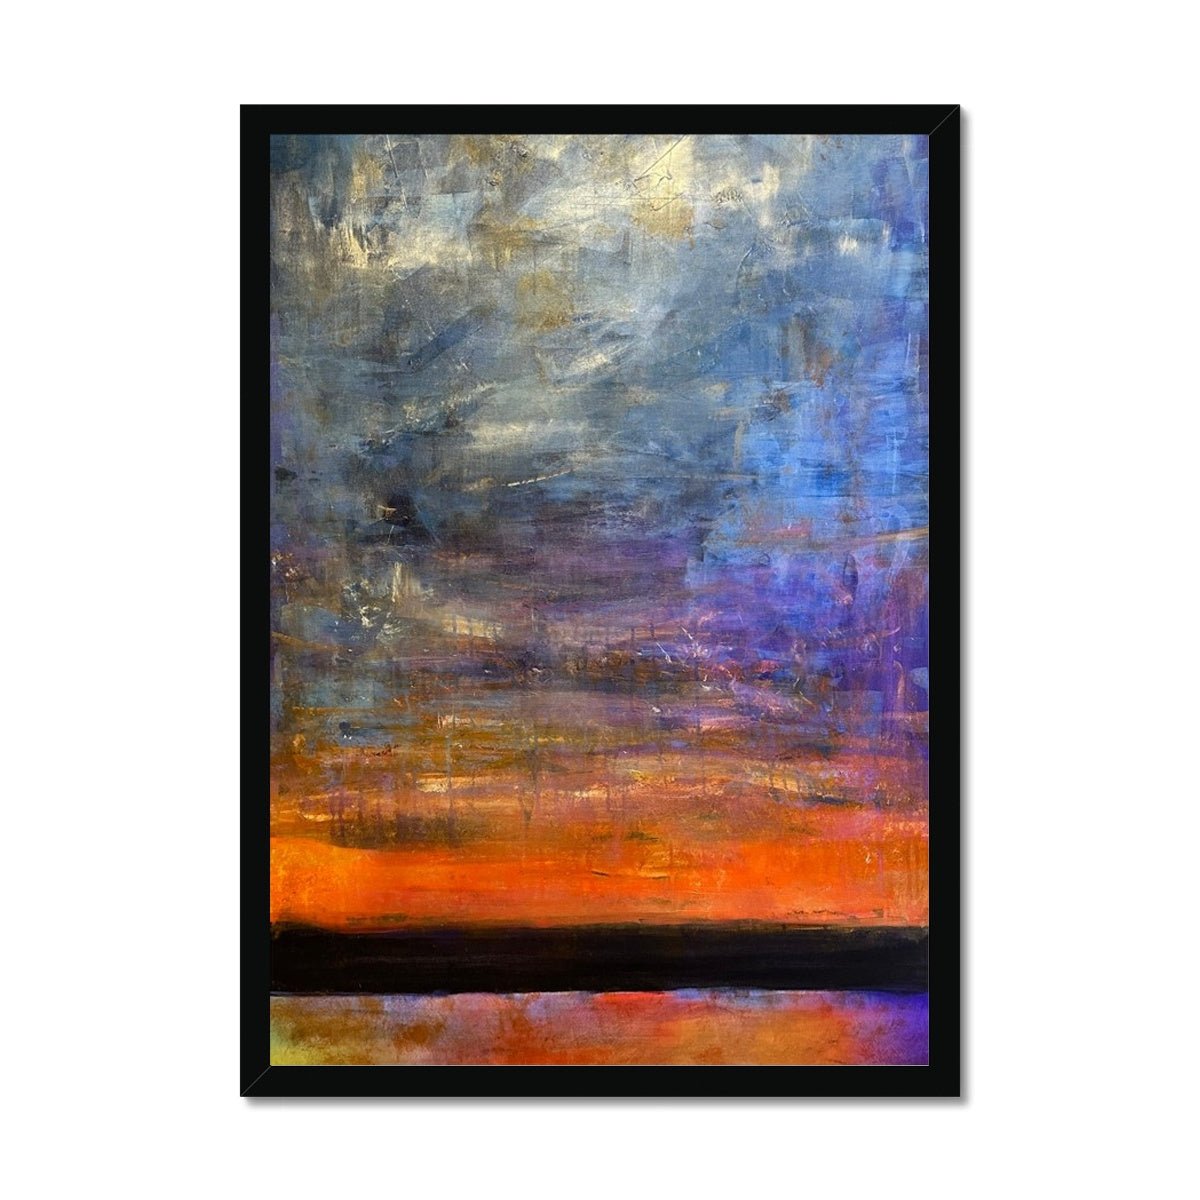 Horizon Dreams Abstract Painting | Framed Prints From Scotland-Framed Prints-Abstract & Impressionistic Art Gallery-A2 Portrait-Black Frame-Paintings, Prints, Homeware, Art Gifts From Scotland By Scottish Artist Kevin Hunter